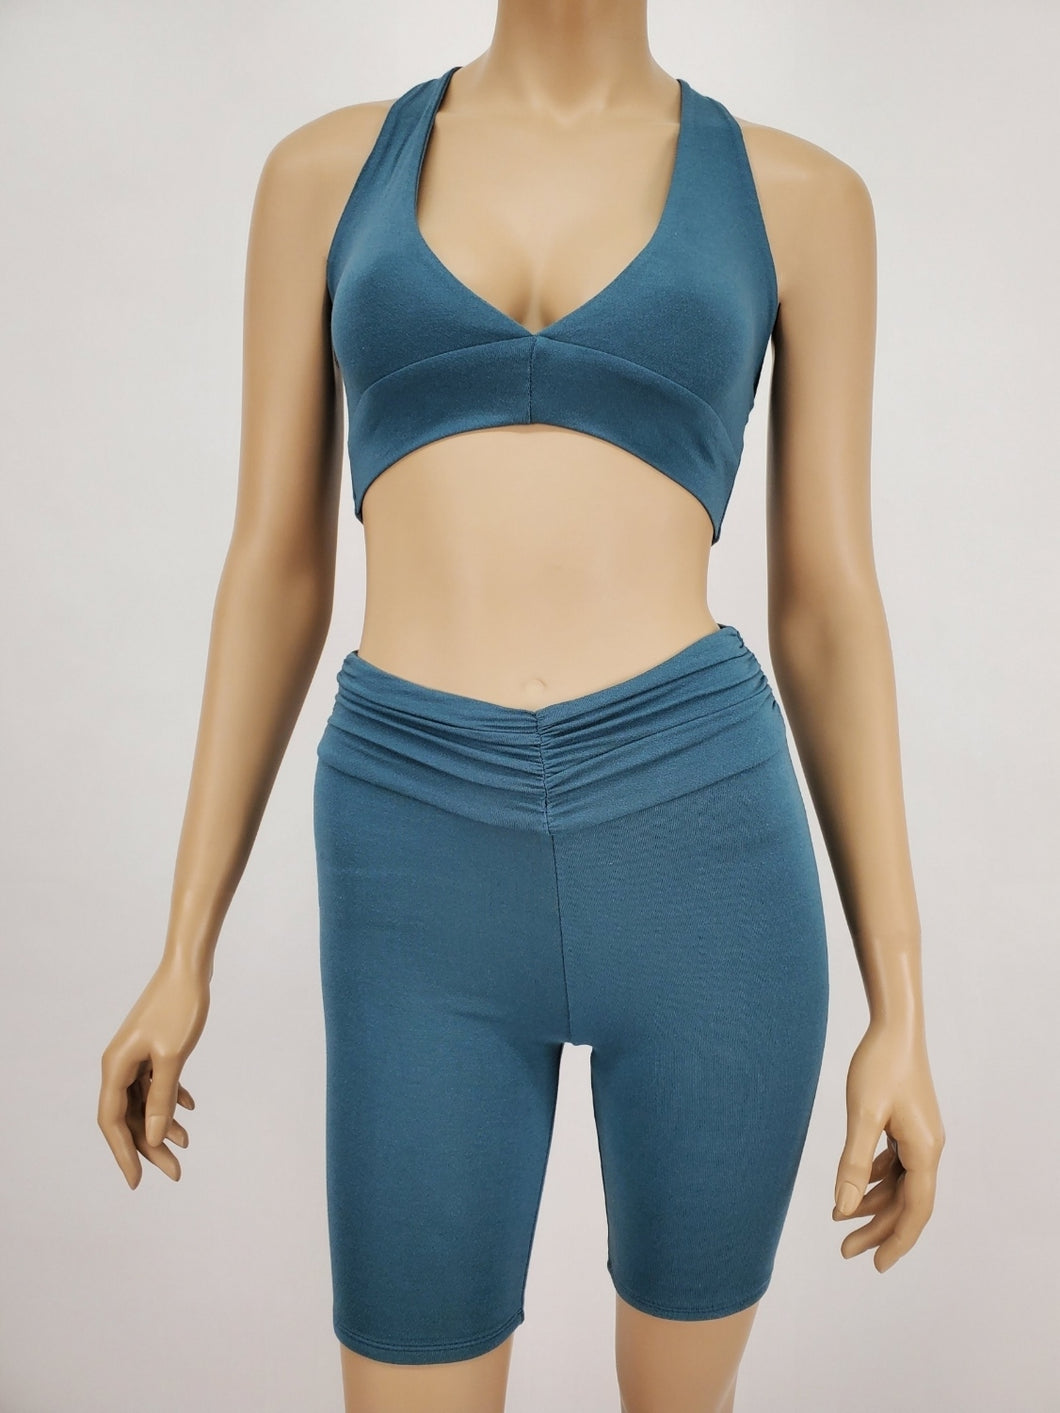 Criss Cross Back Top and Waistband with Shirring Biker Short 2 Pc. Set (Teal)